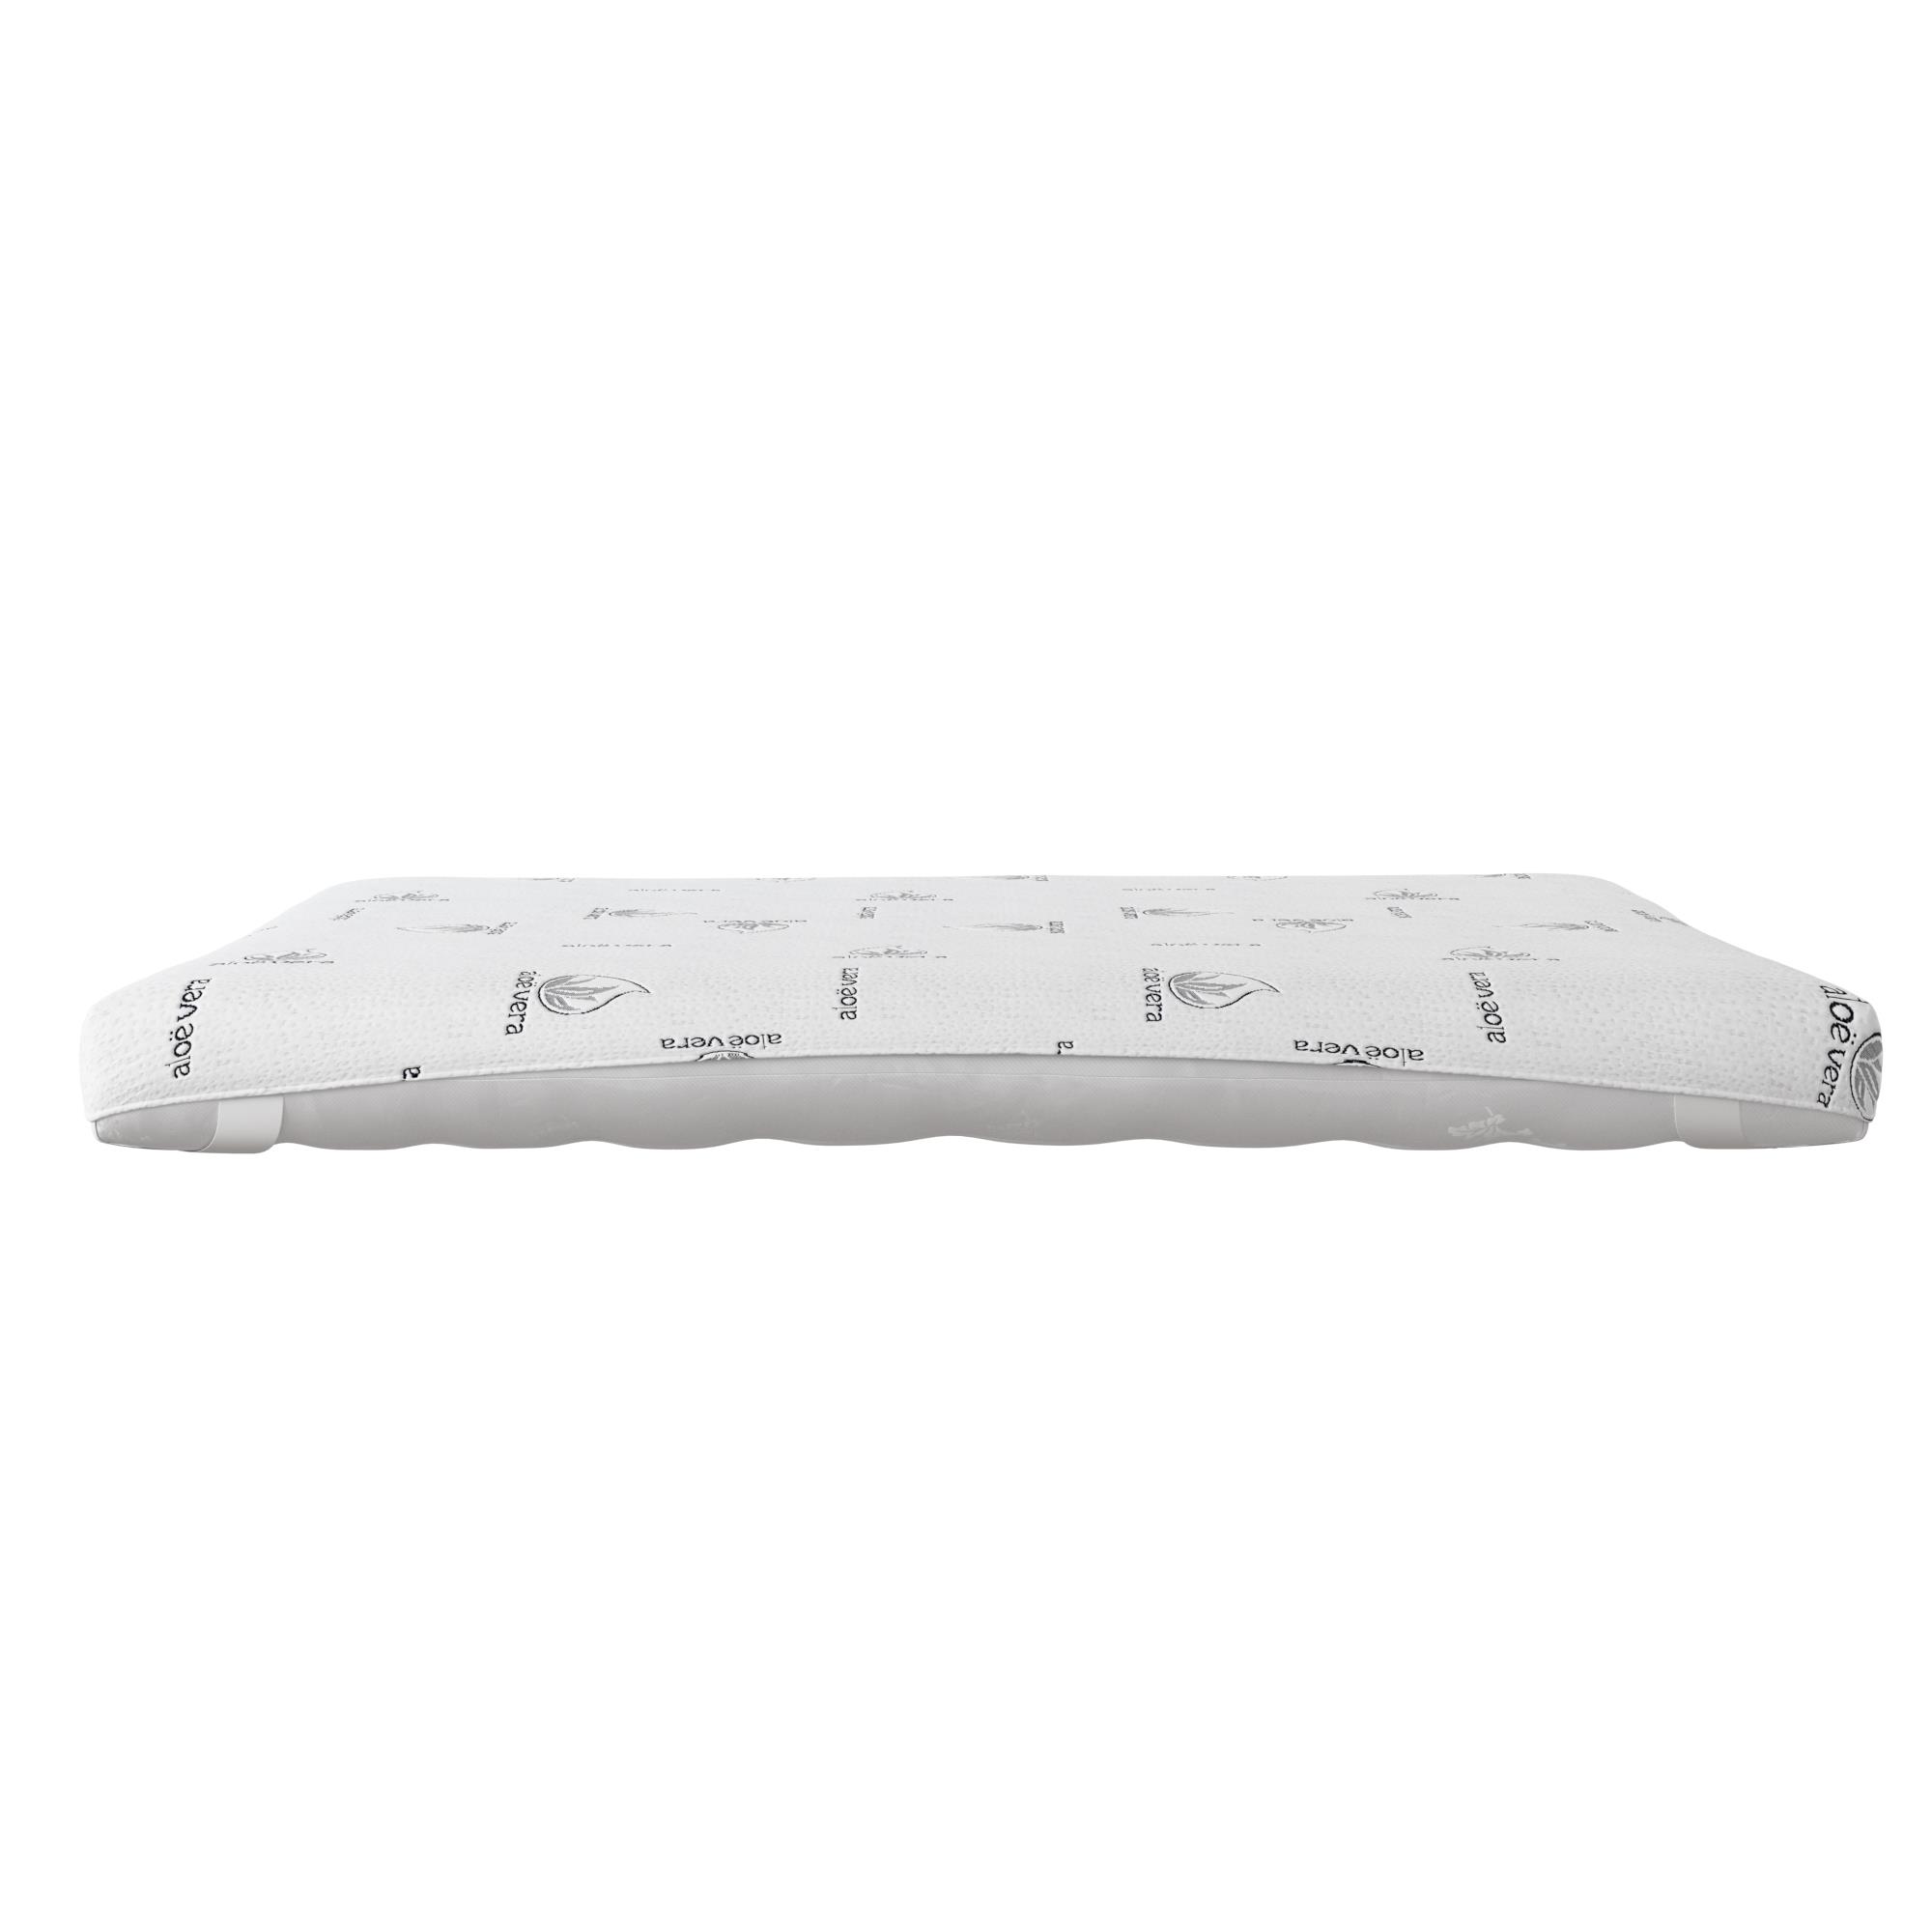 Signature Sleep Honest Elements 7 Natural Wool Mattress with Organic Cotton and Micro Coils, Full Size, [bed_full] - image 3 of 23